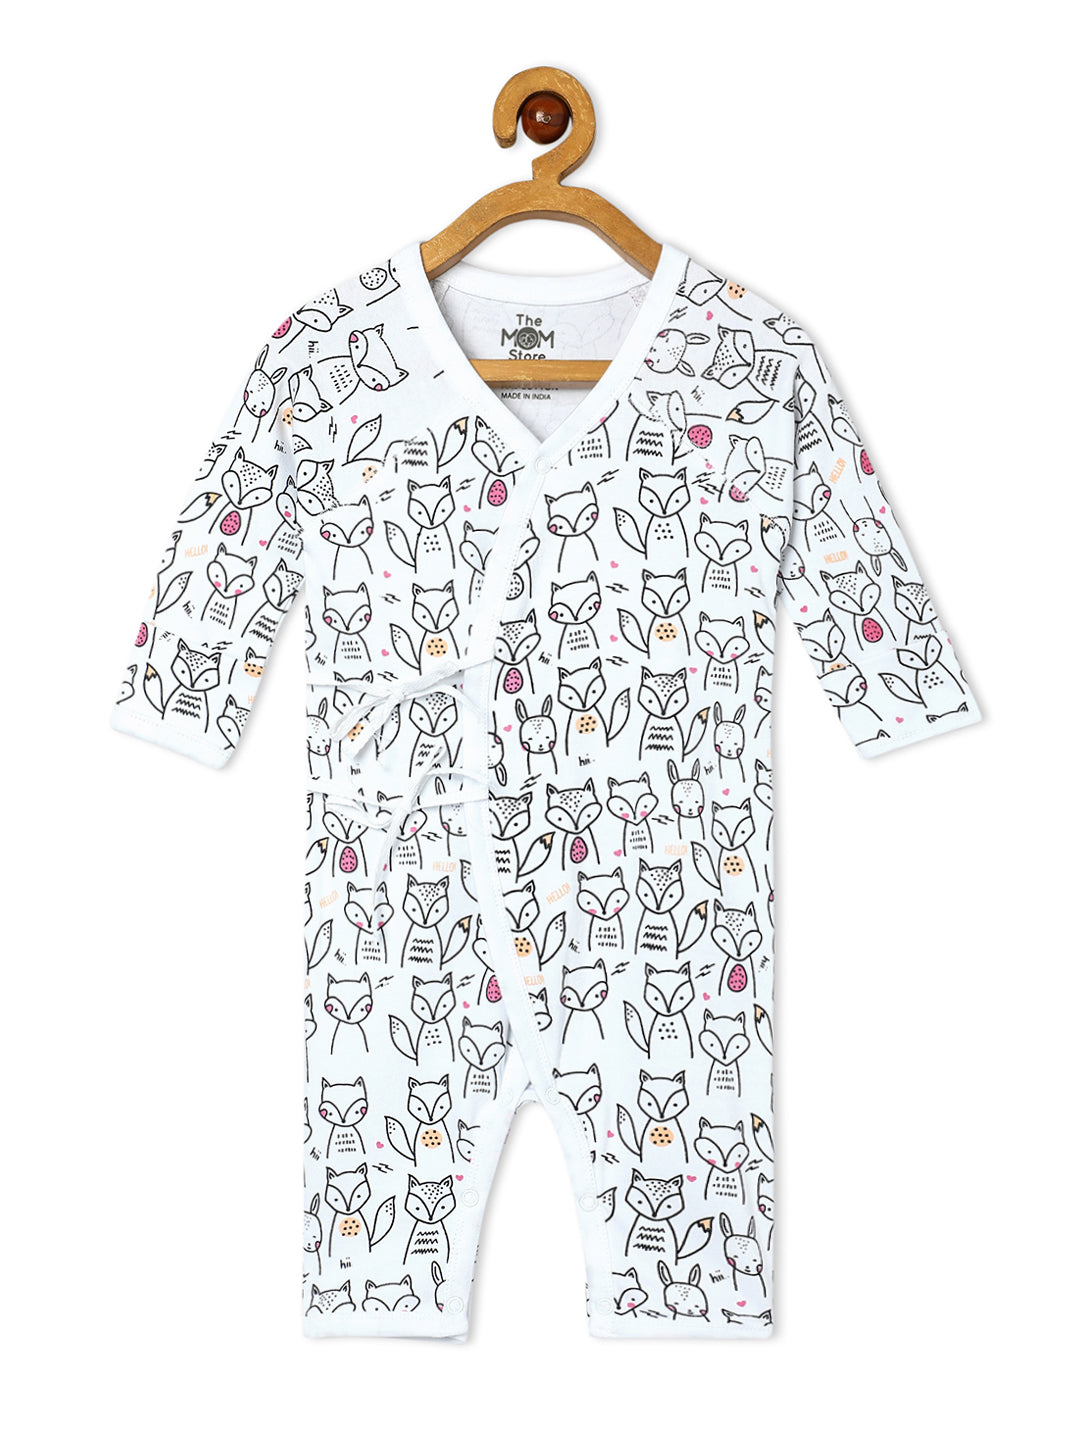 Foxier Than The Fox Infant Romper (Jabla Style)